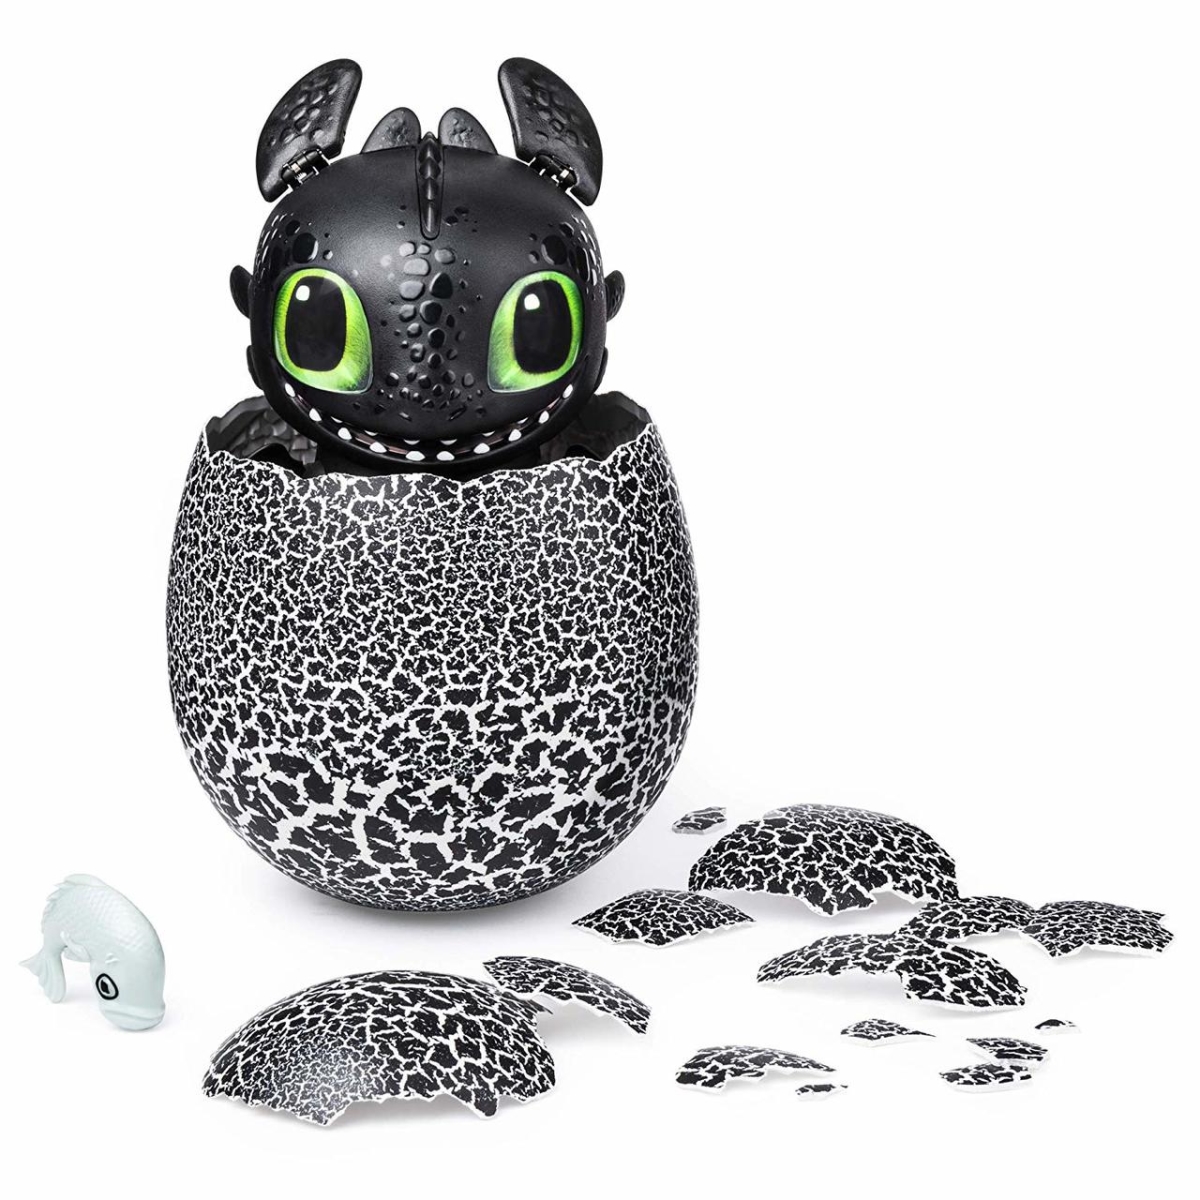 30372590 How To Train Your Dragon Hatching Baby Dragon Egg